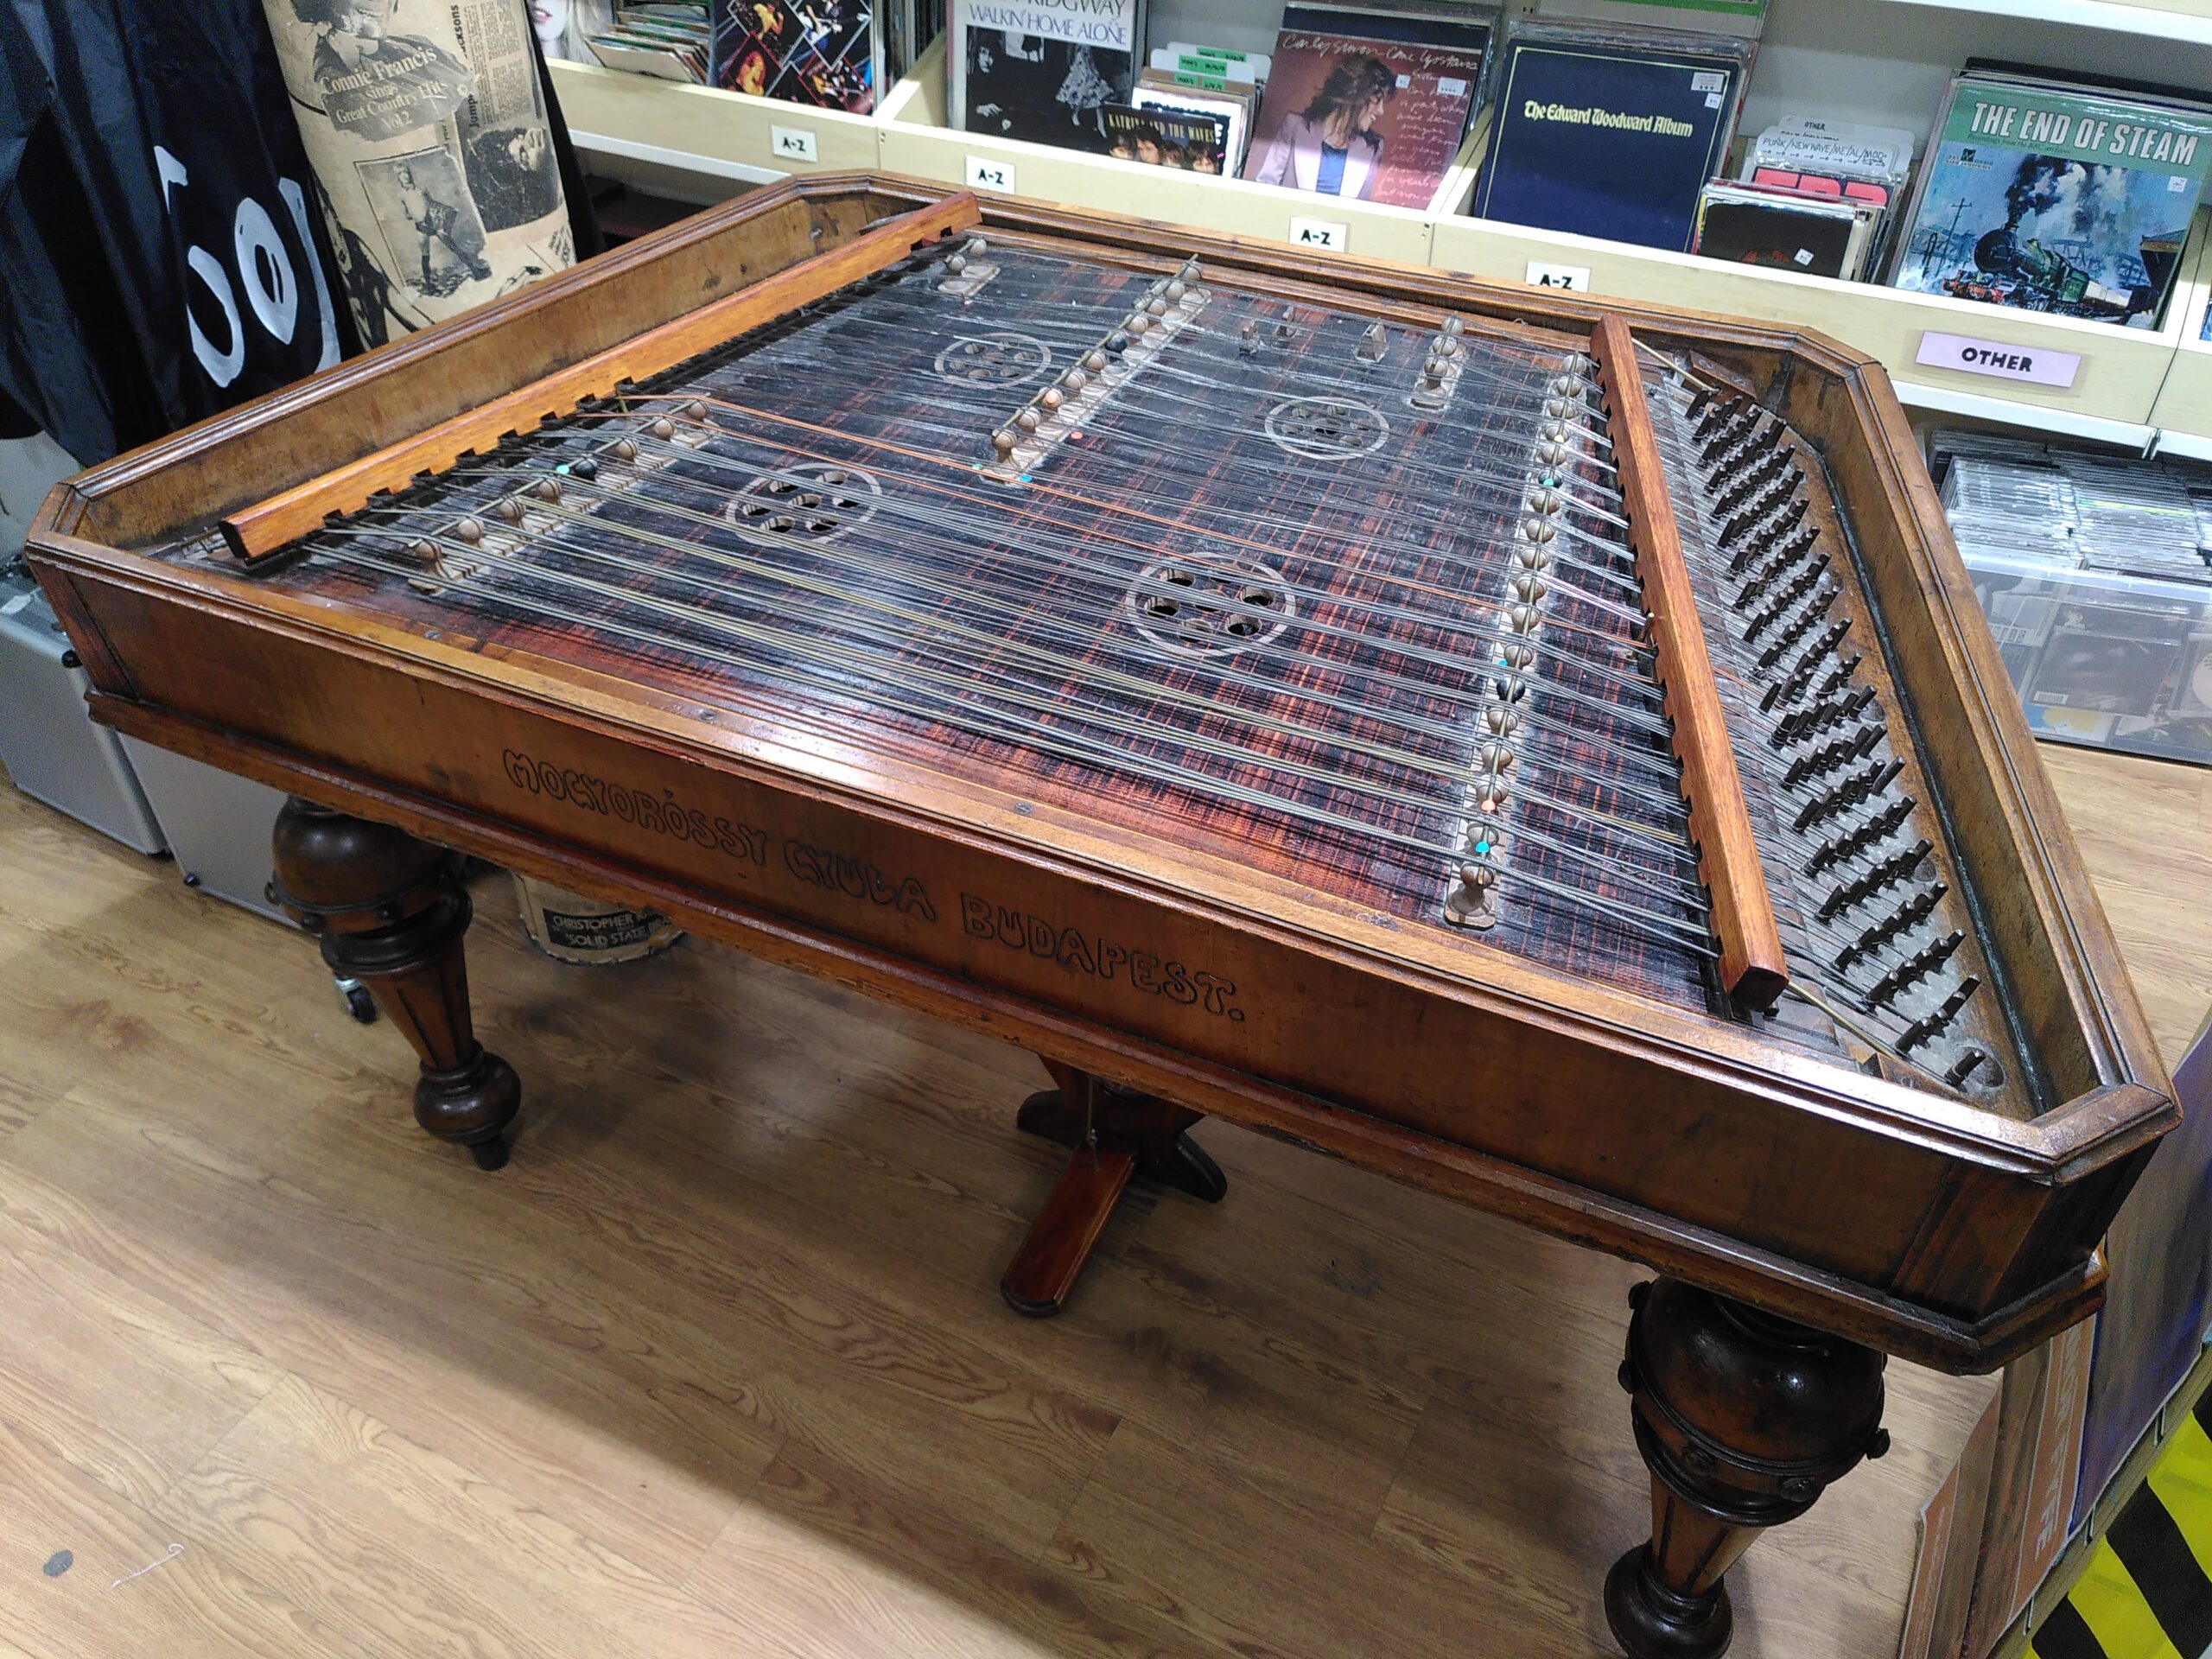 Cimbalom in Oxfam Music Shop